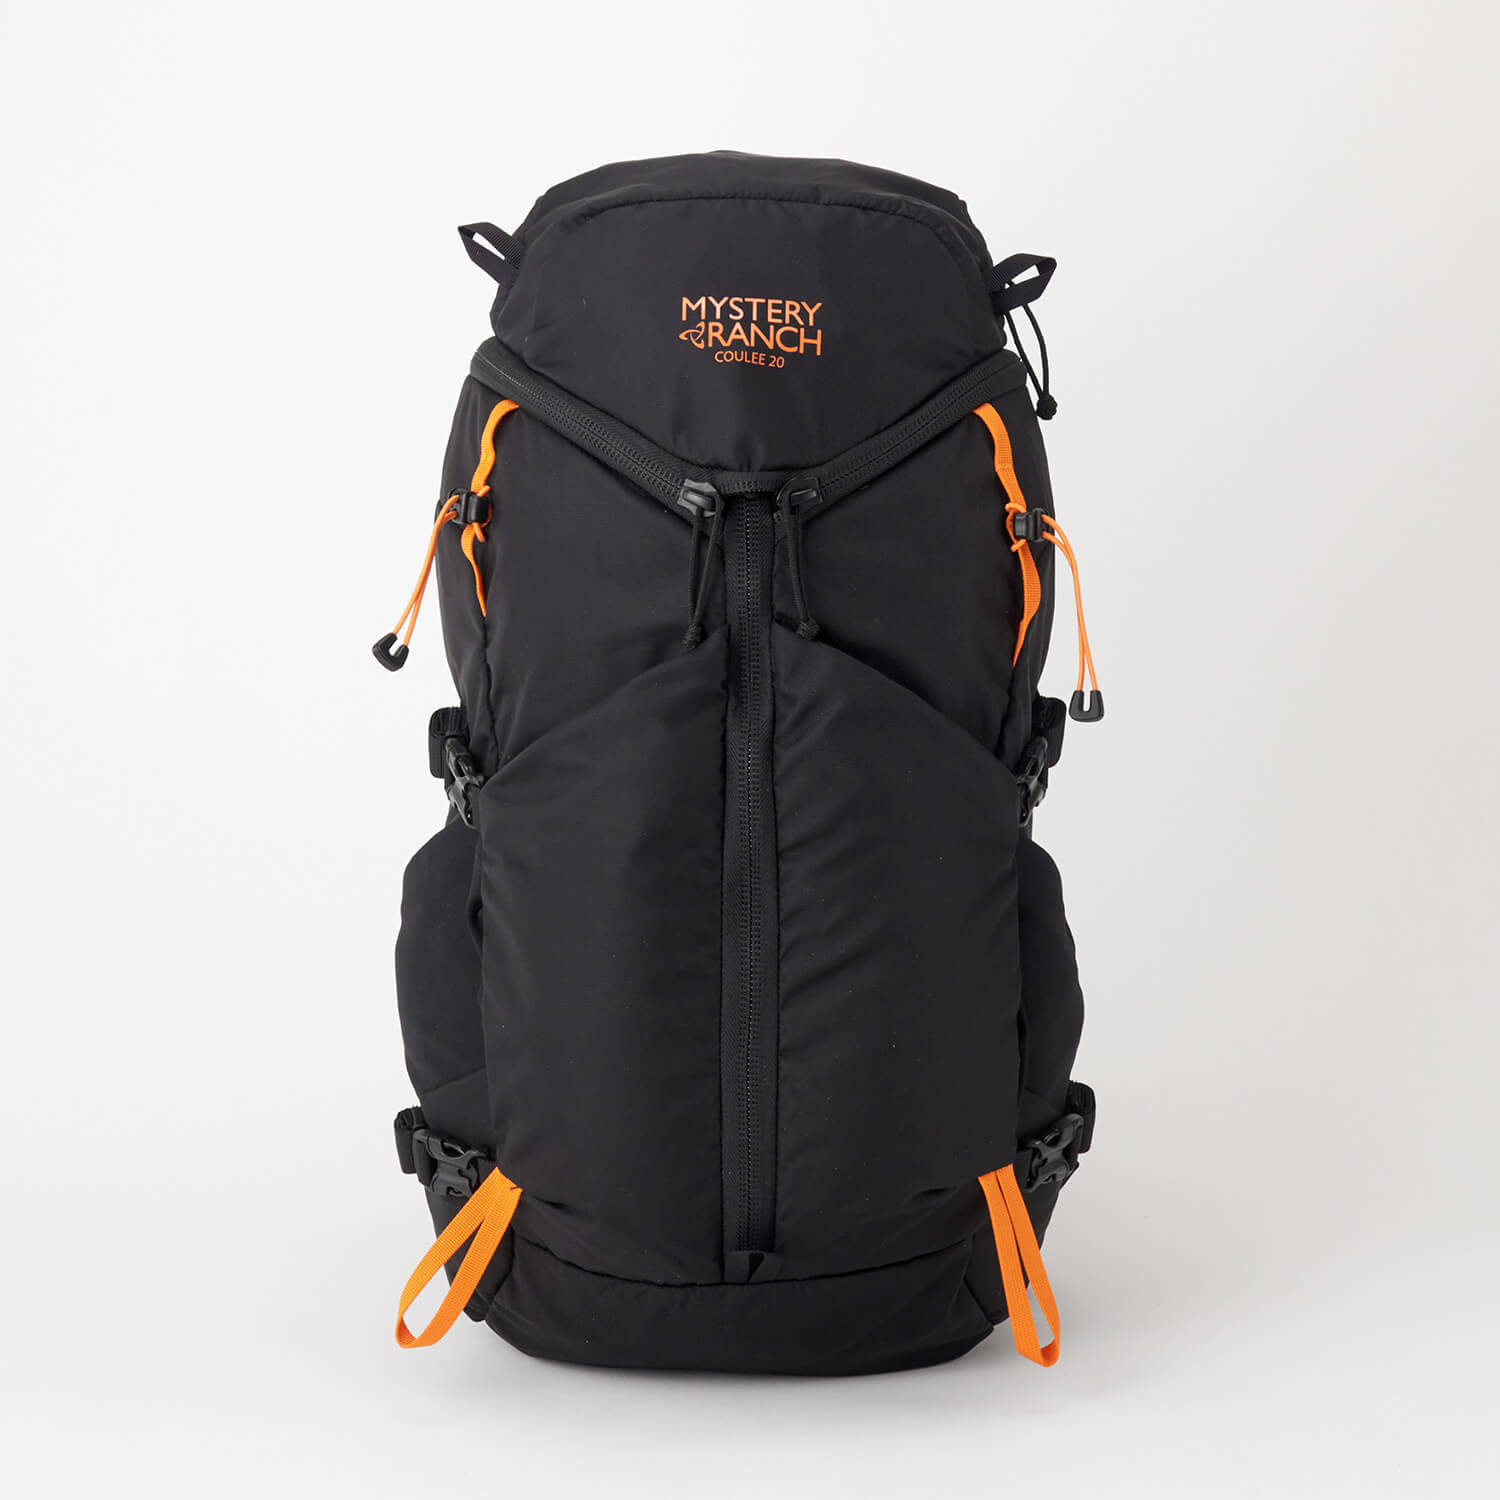 MYSTERY RANCH THE works 登山用リュック backpack今回のMYSTE